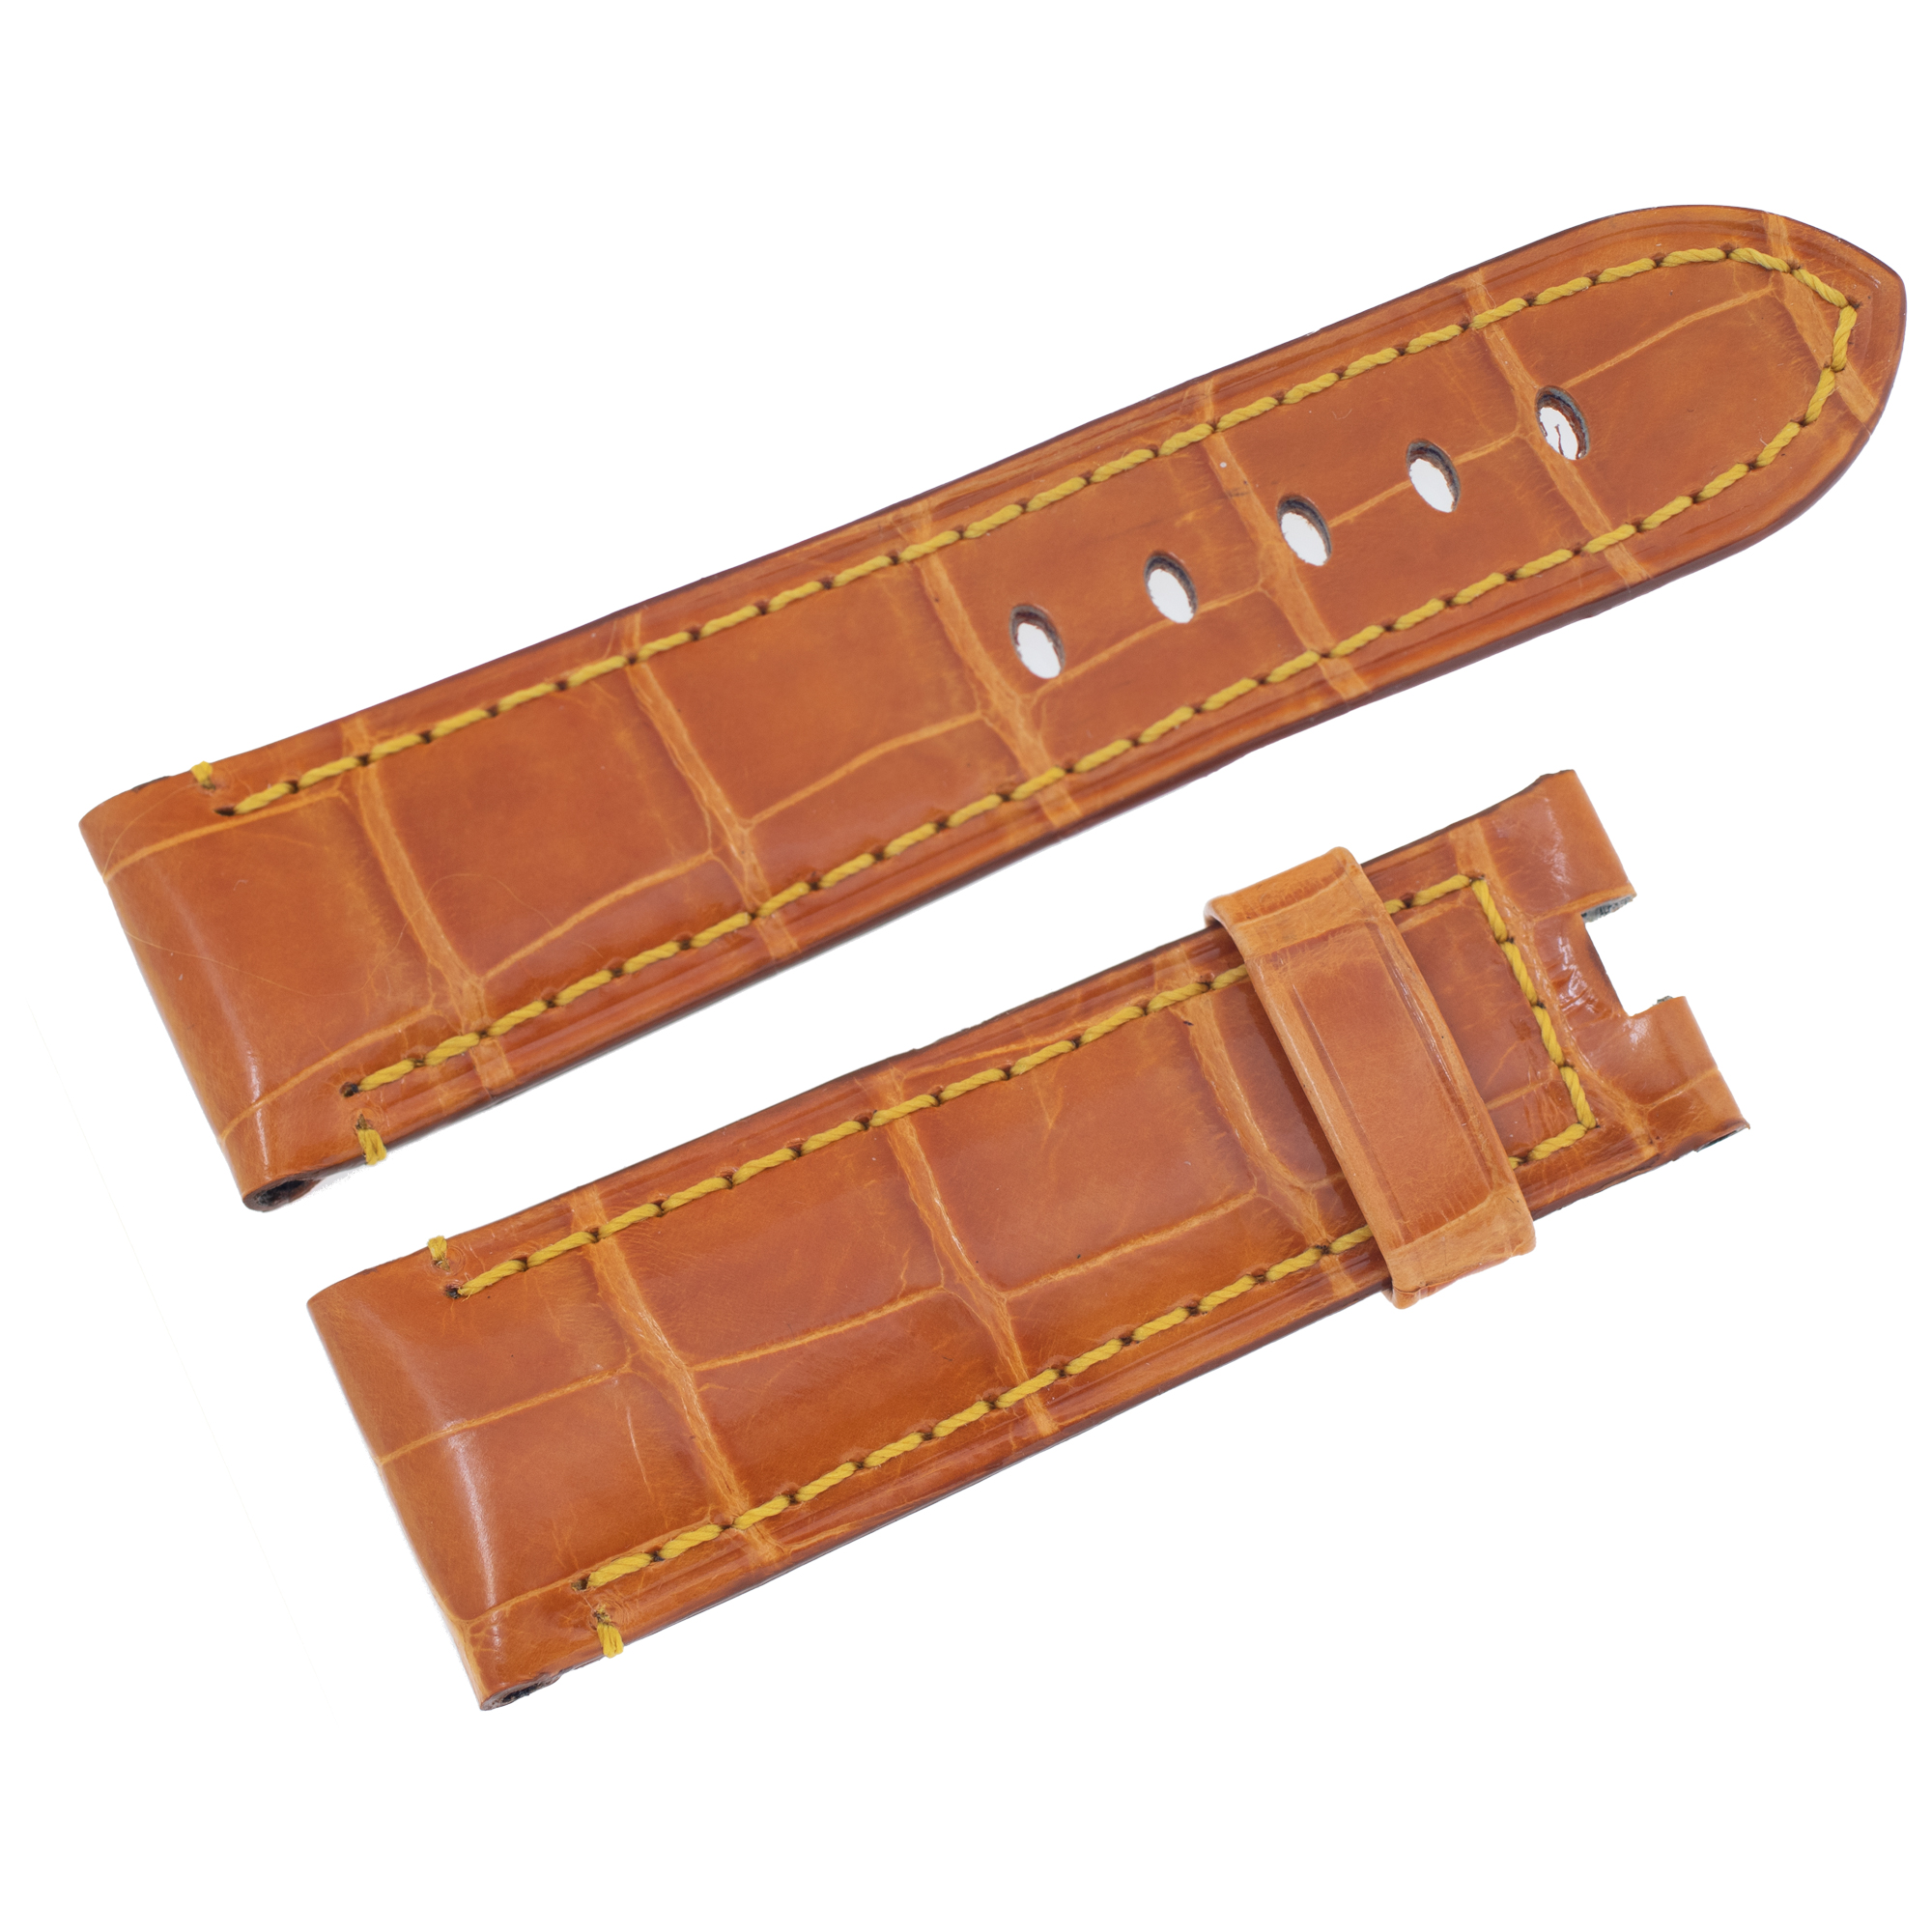 Panerai mustard yellow alligator strap for tang buckle (22mm x 20mm)